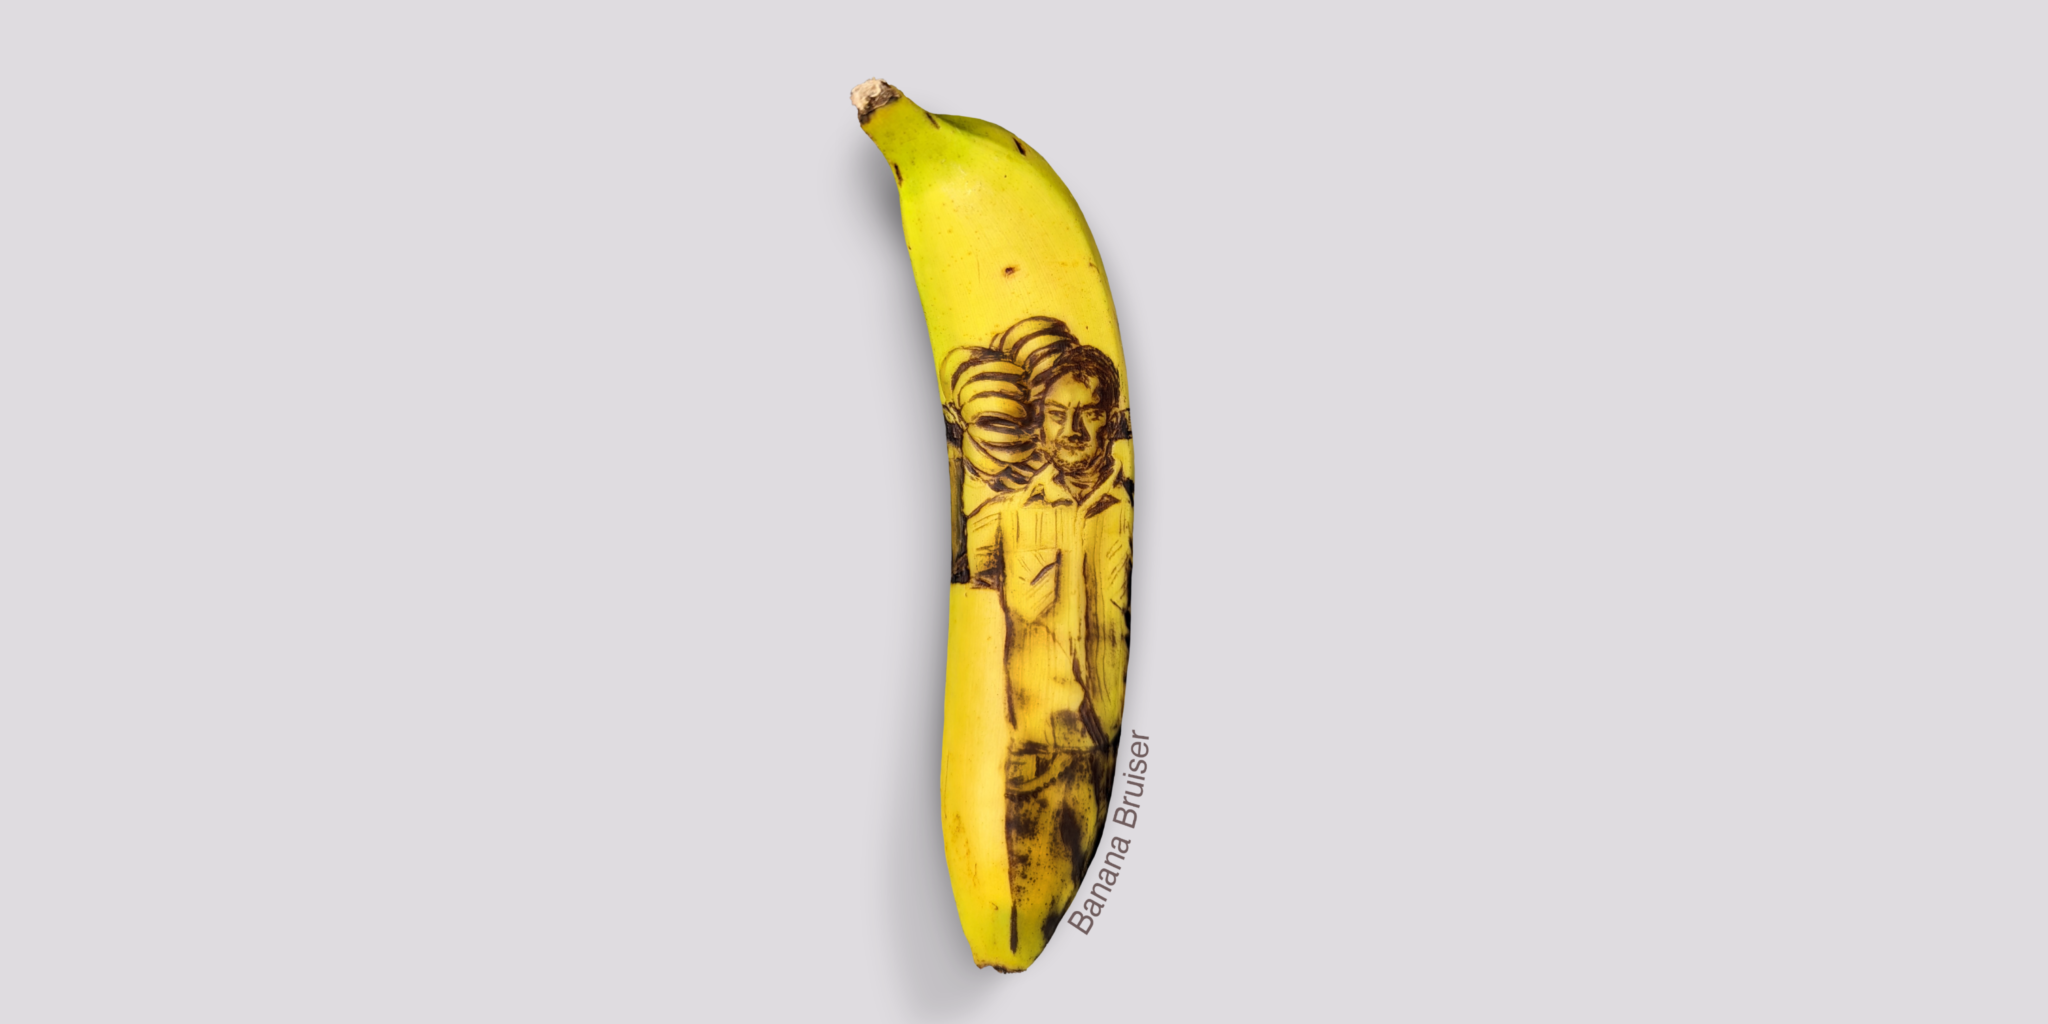 You are currently viewing Fairtrade Foundation collaborates with banana bruiser artist to celebrate banana farmers worldwide and highlight challenges they face